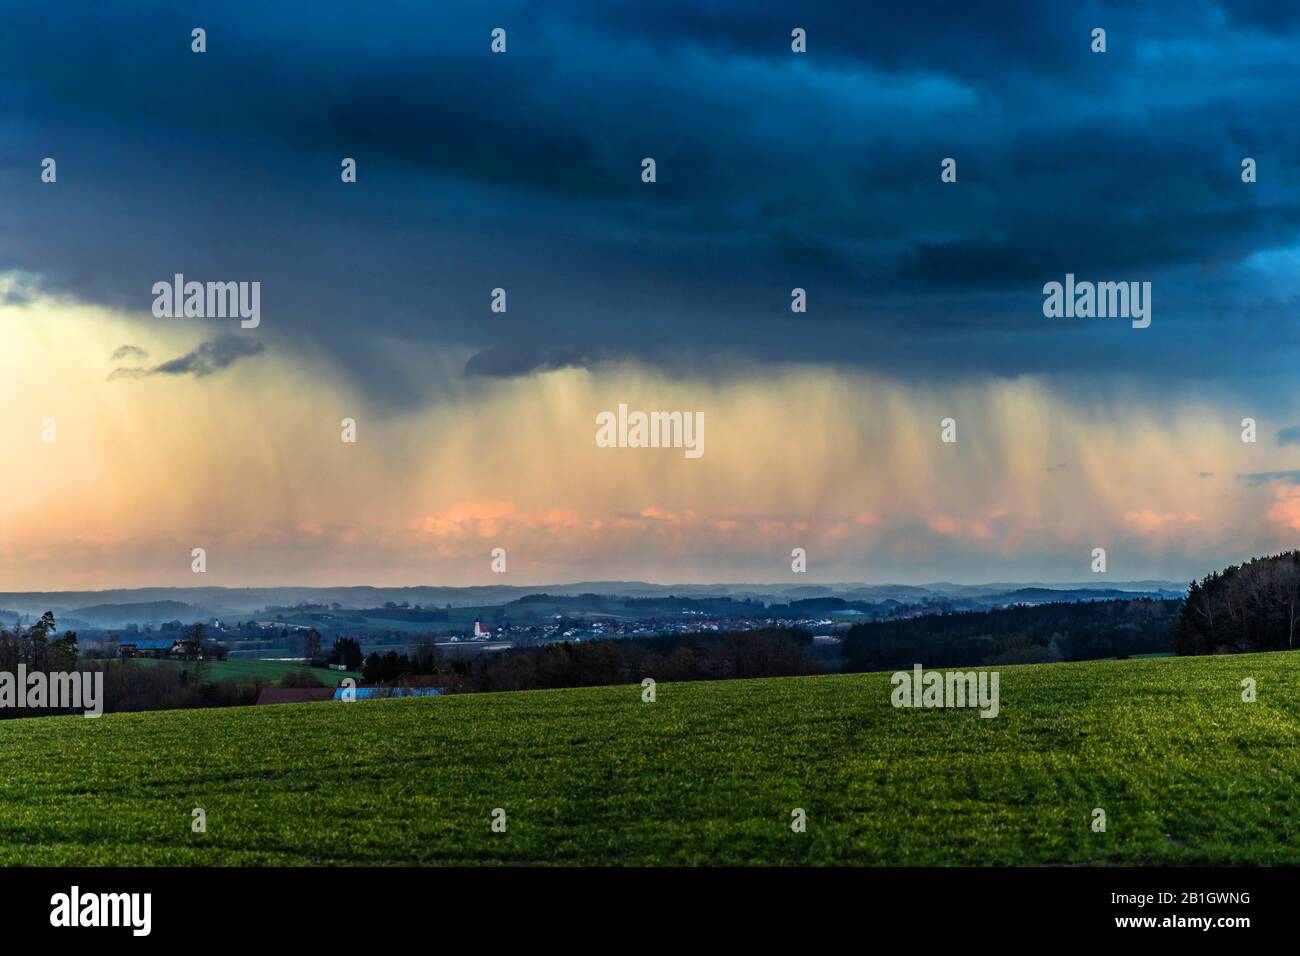 thunder clod and rain shower over the valley, Germany, Bavaria, Isental Stock Photo